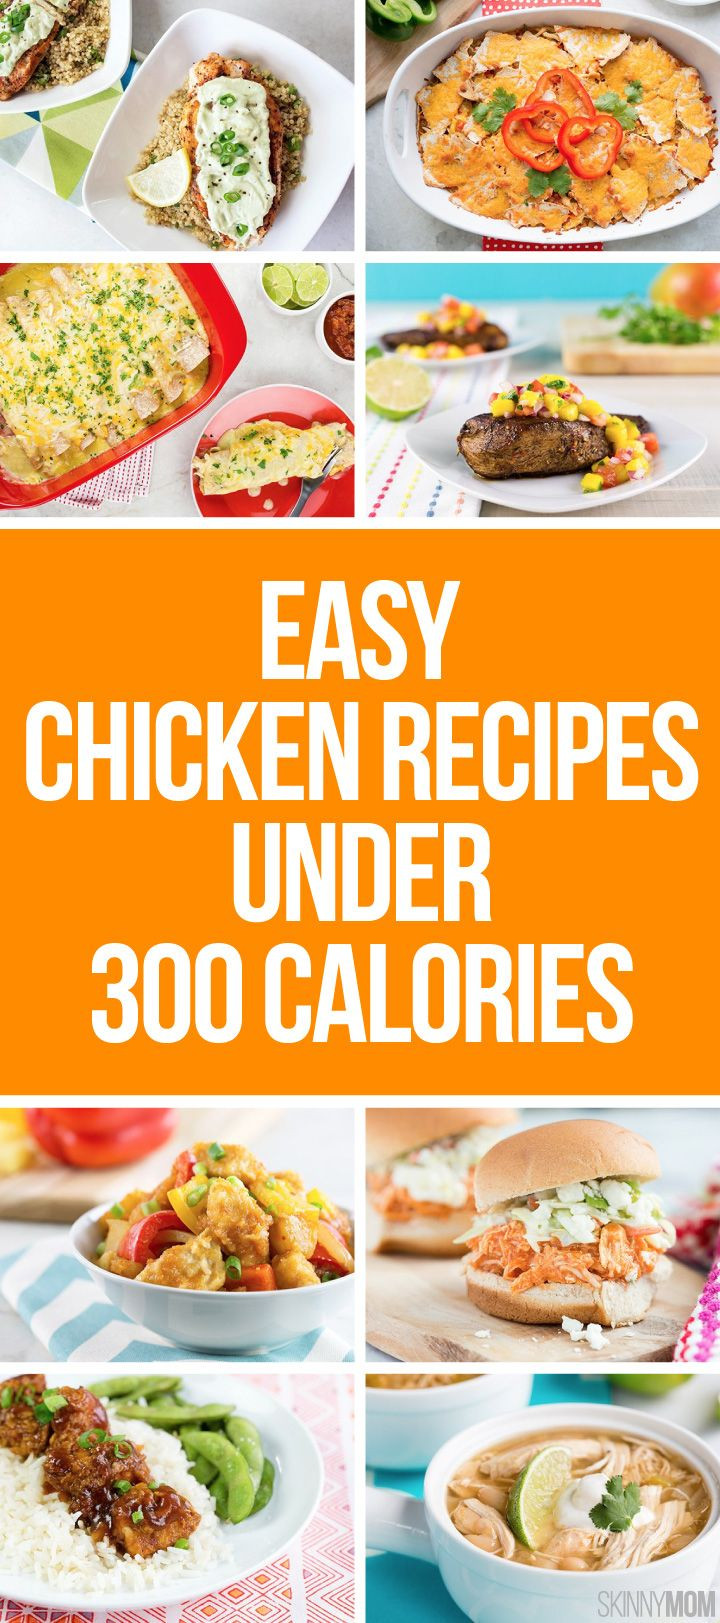 Low Calorie Chicken Dinner Recipes
 The 25 best Low calorie recipes ideas on Pinterest